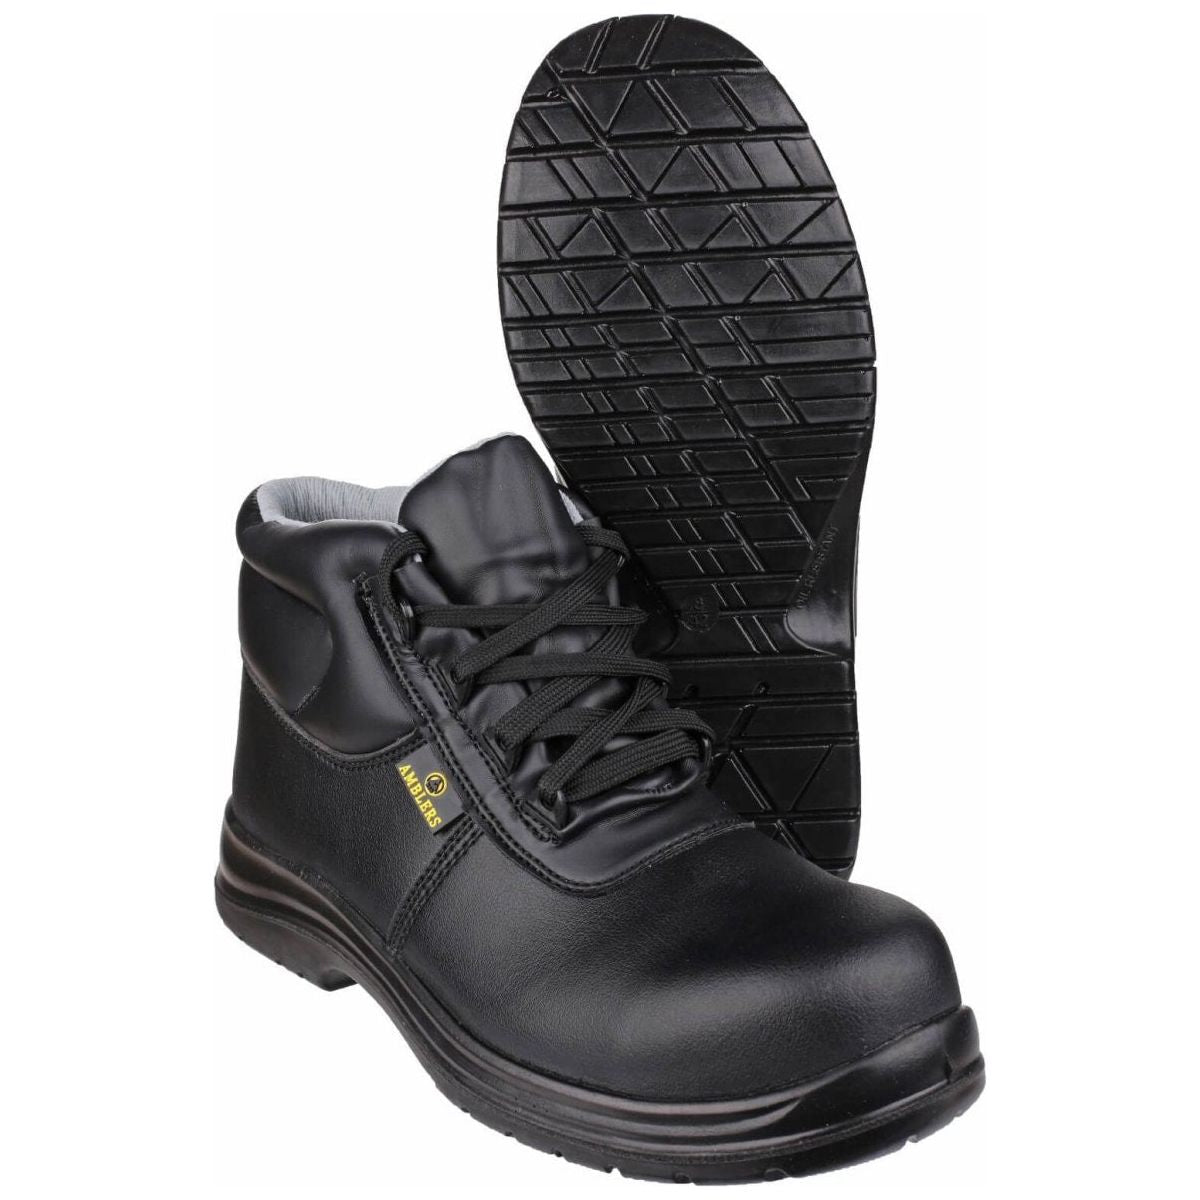 Amblers Fs663 Metal-Free Water-Resistant Safety Boots Womens - workweargurus.com